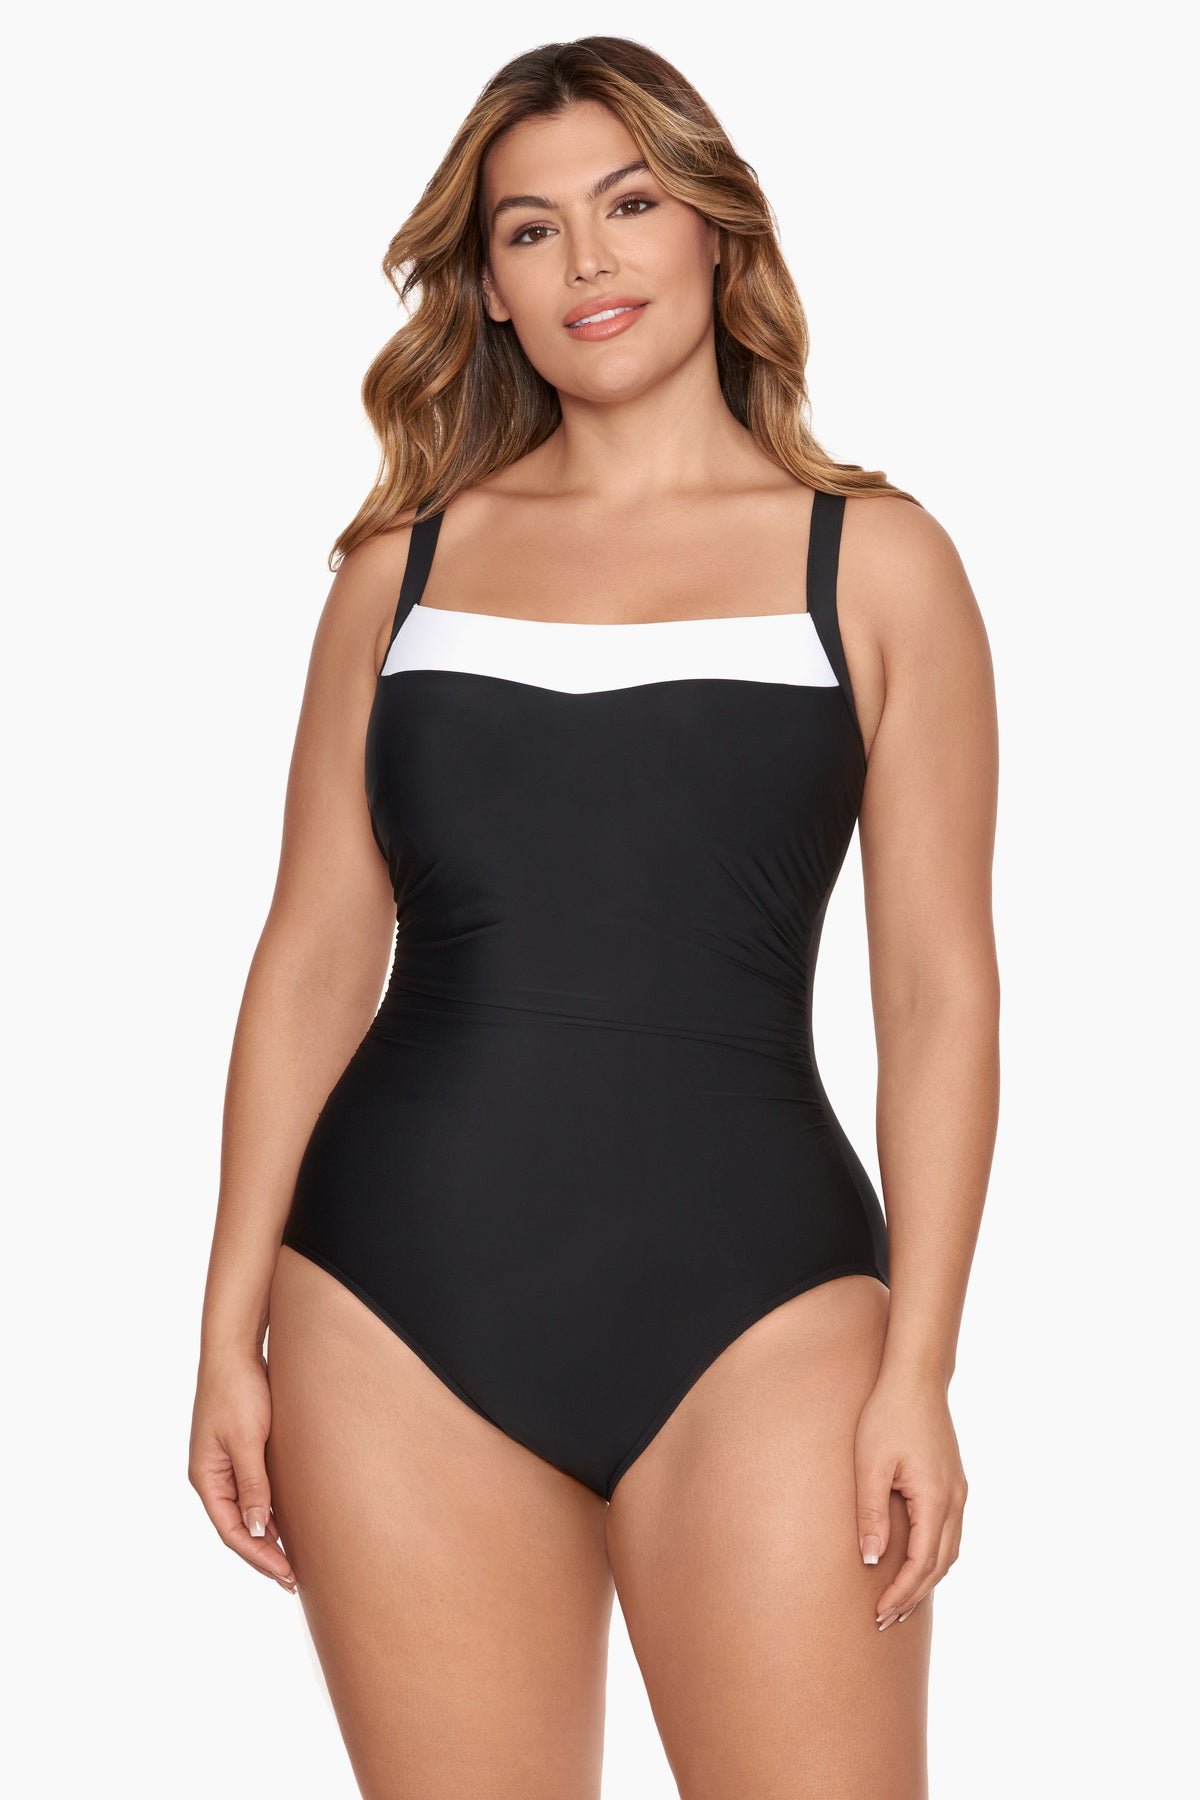 Miraclesuit Women's Swimwear DDD-Cup Helix Tummy Control Underwire Scoop  Neckline One Piece Swimsuit, Black/White, 10DDD at  Women's Clothing  store